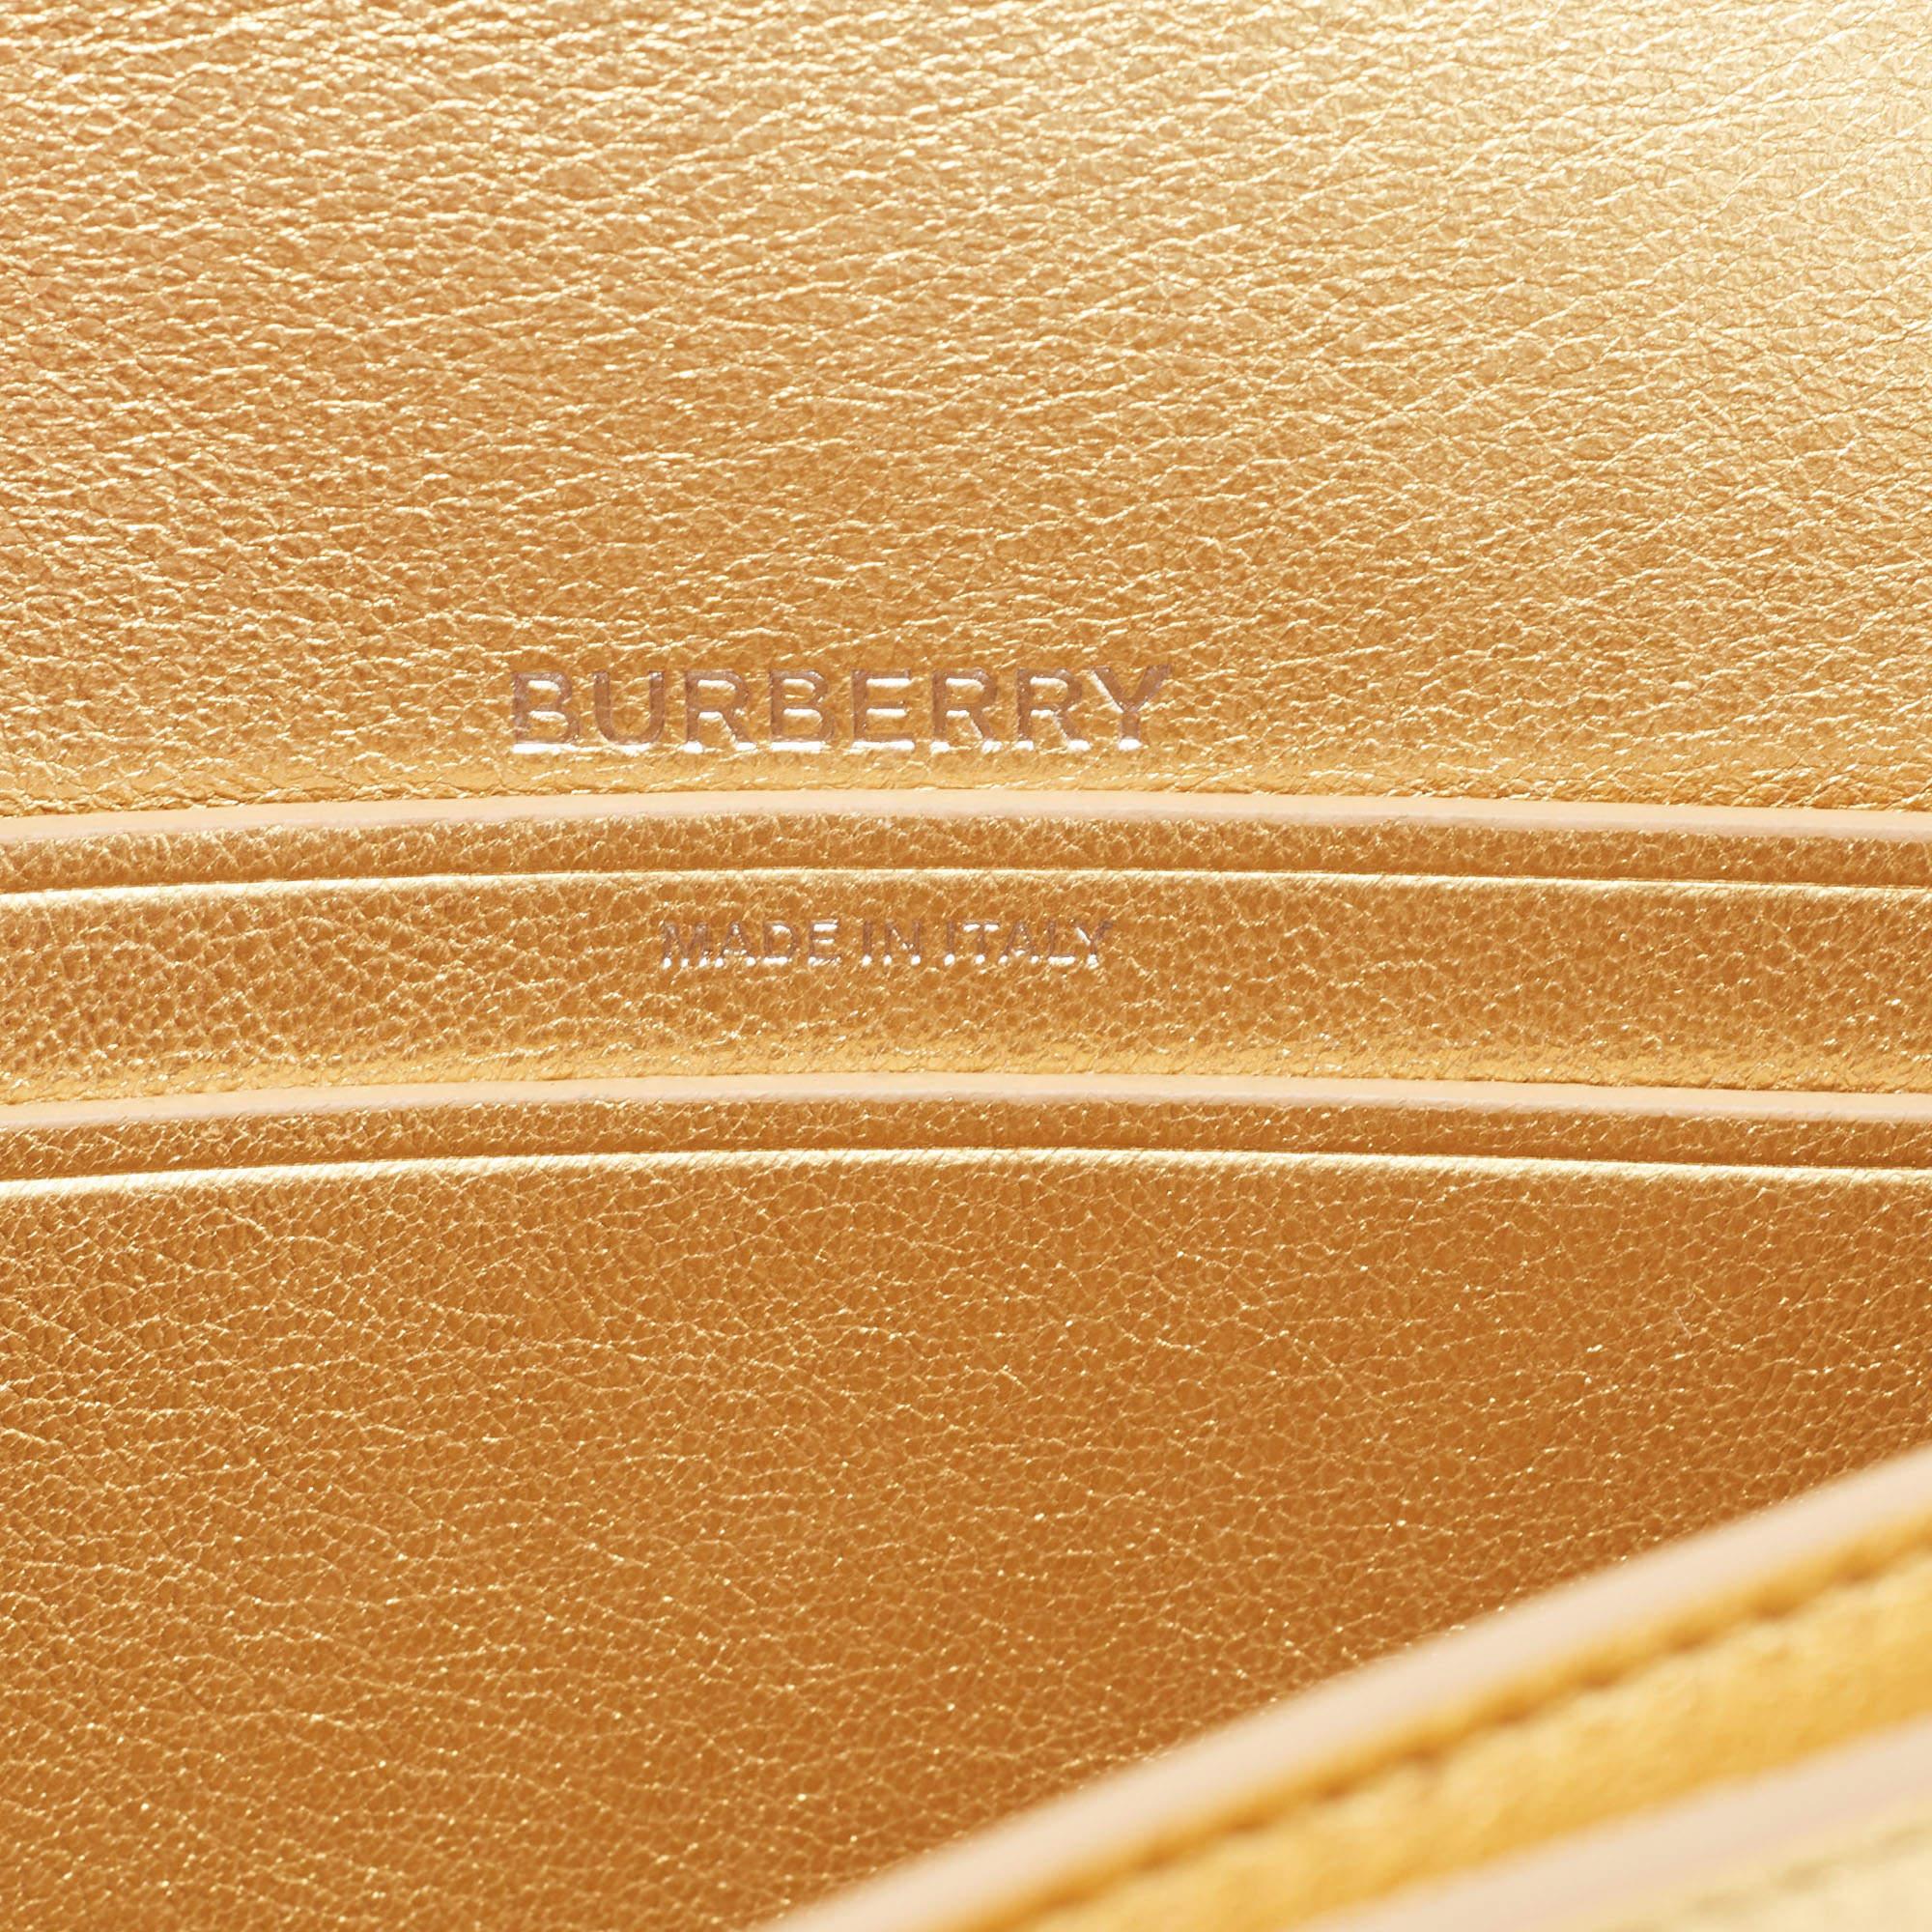 Burberry Gold Leather Small Olympia Shoulder Bag 8